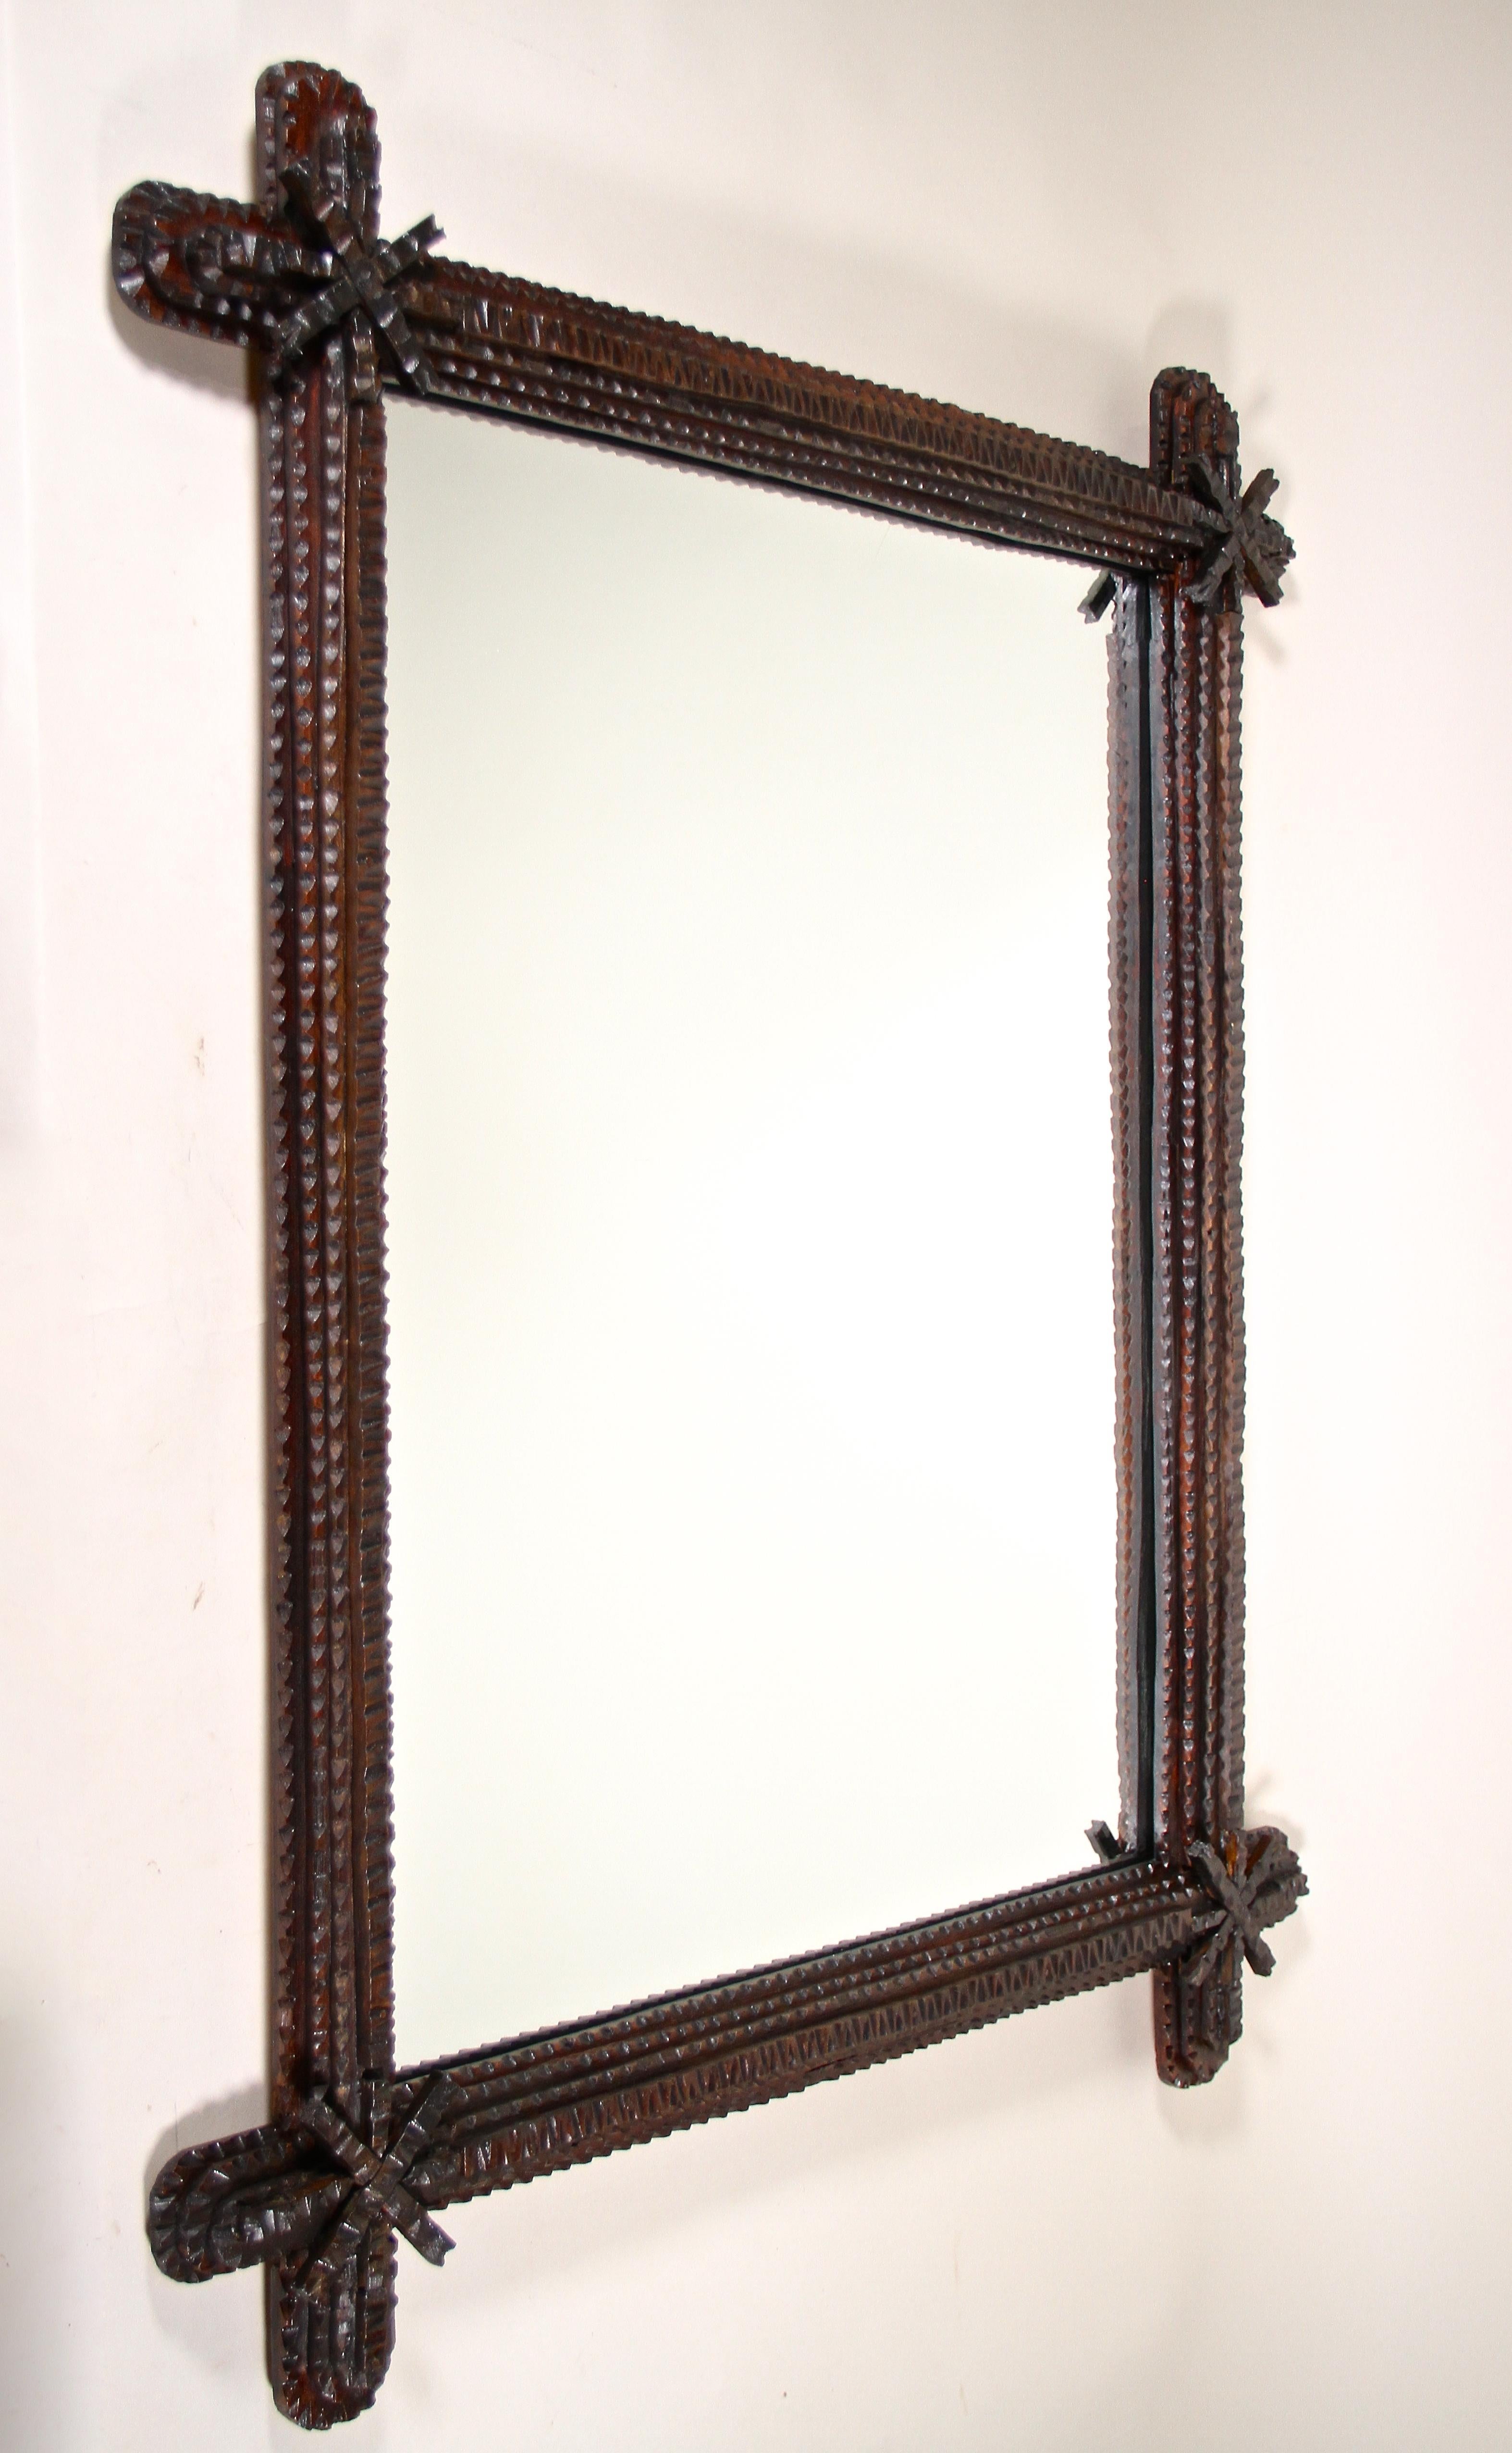 Fantastic rustic Tramp Art Mirror from the late 19th century in Austria. Hand carved around 1870 out of basswood in a very artful way, this unique rural wall mirror impresses with lovely chip carvings. The protruding, rounded corners are